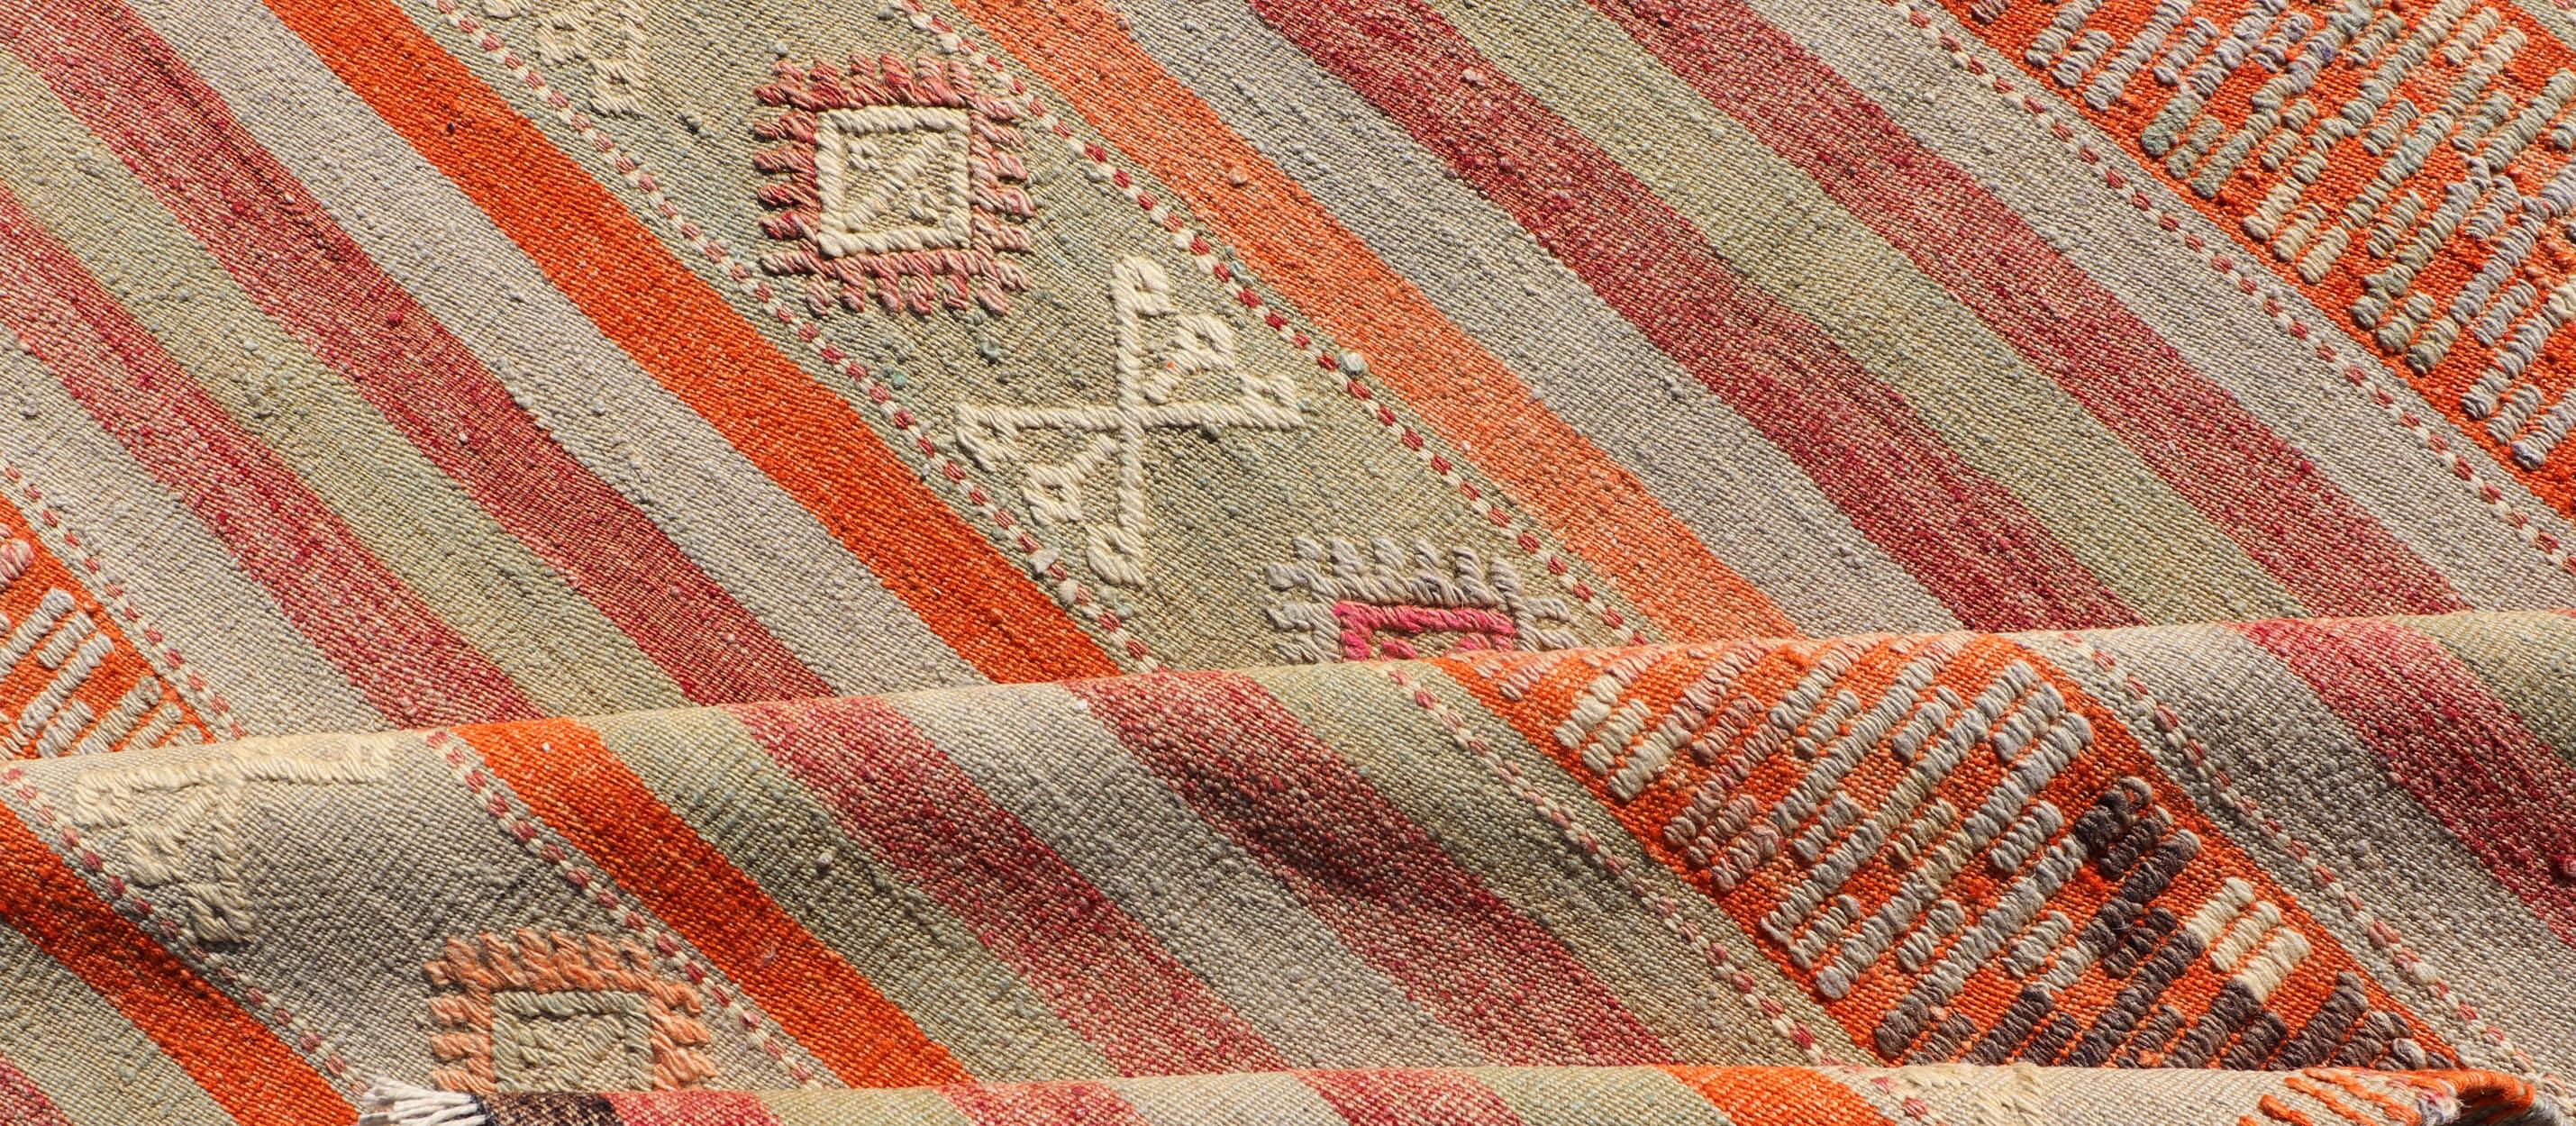 Vintage Turkish Kilim with Colorful Stripes in Orange, Lt. green, red & gray  For Sale 1